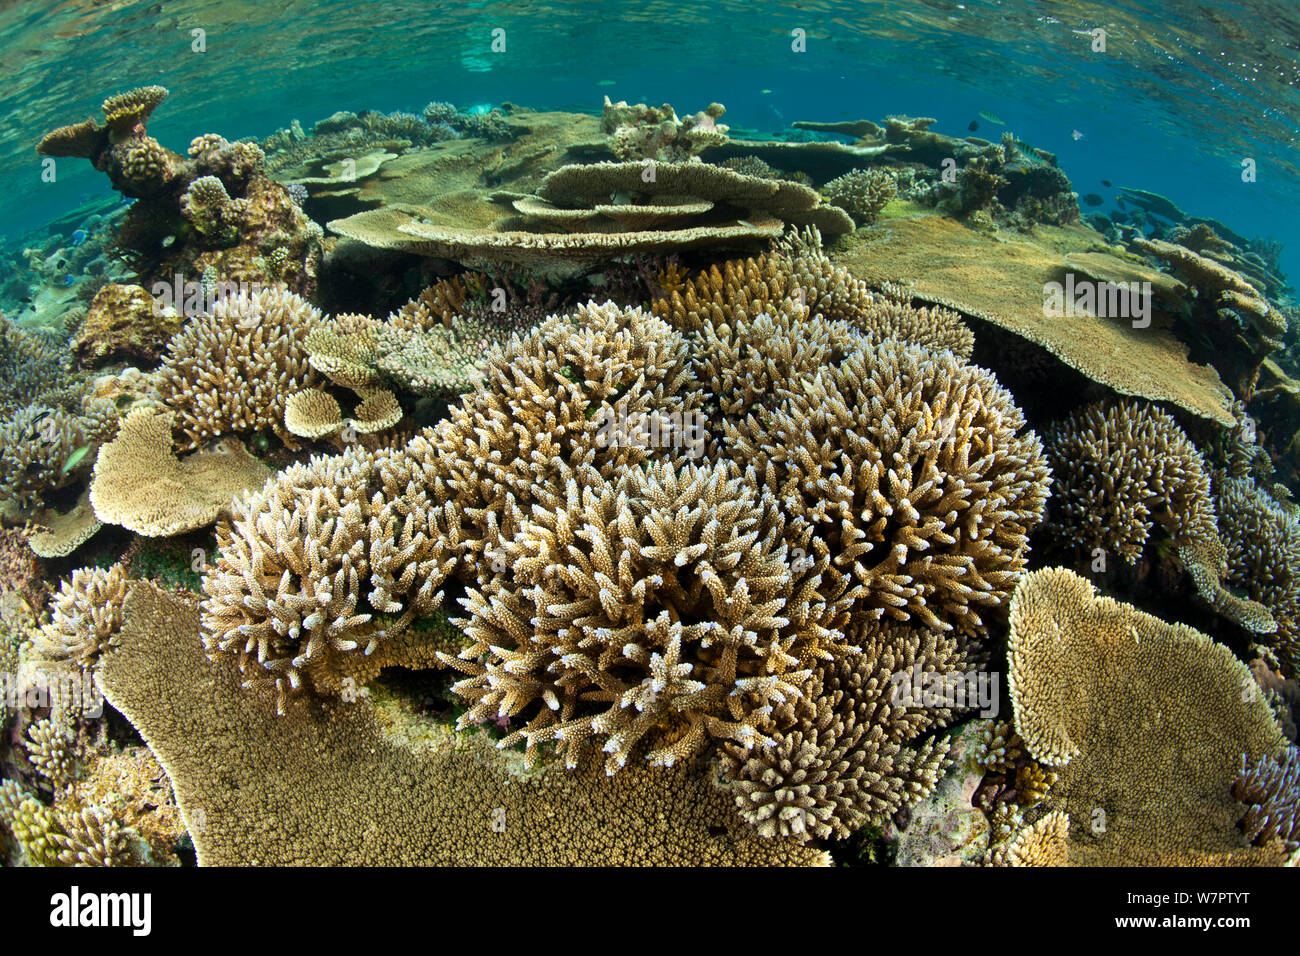 Reef covered with various (Acropora) hard corals including Table top coral  (Acropora hyacinthus) as well as (Acropora robusta), Maldives, Indian Ocean  Stock Photo - Alamy